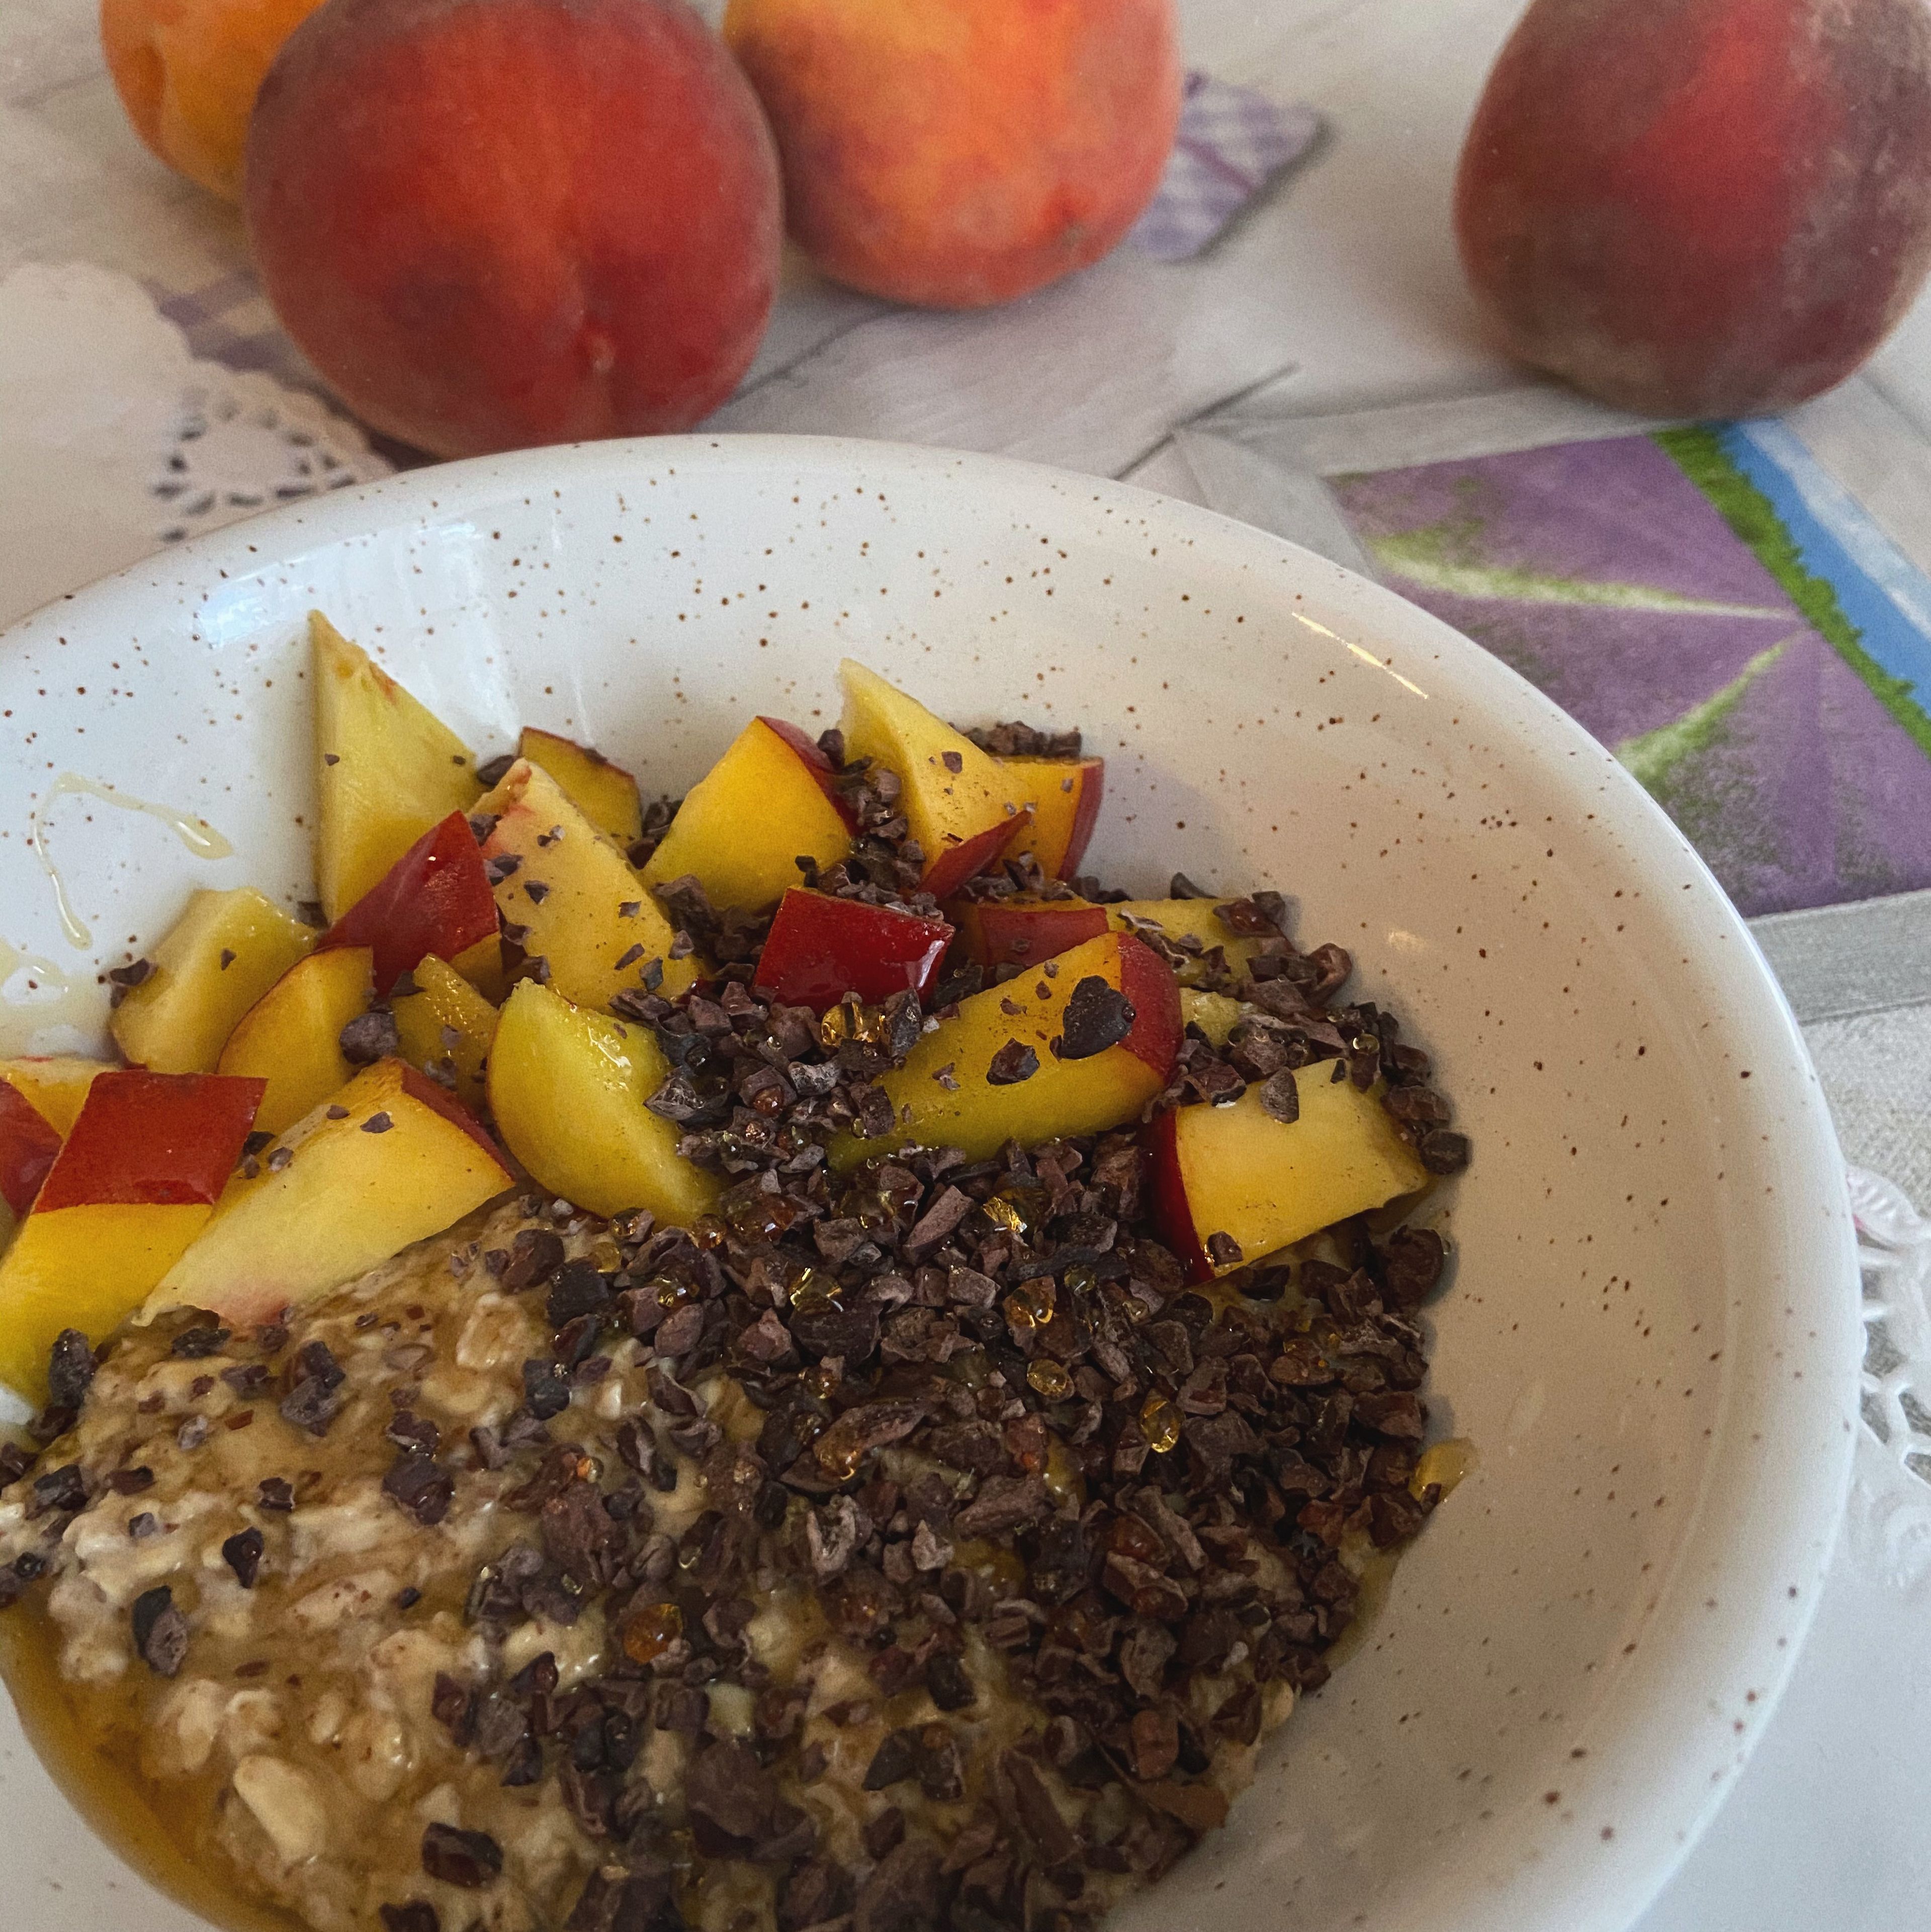 In the morning add the toppings: peach, cacao nibs and honey.